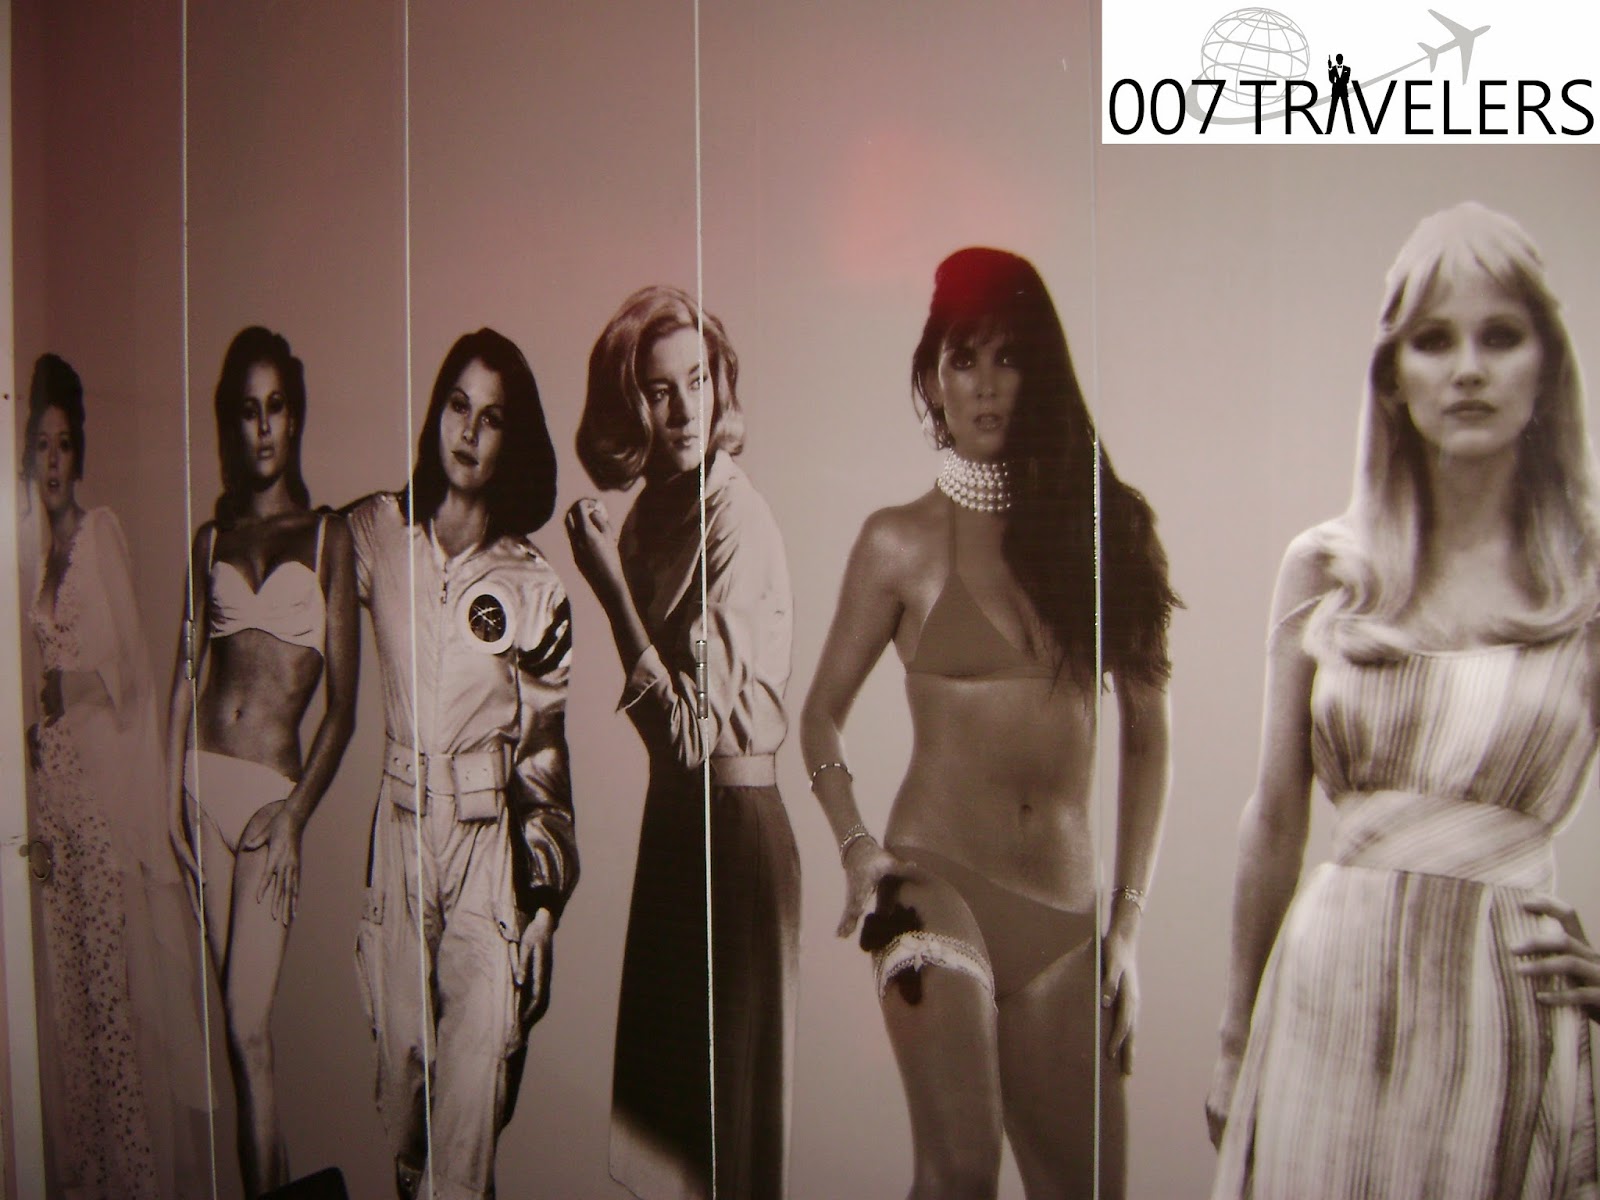 007 TRAVELERS: BOND GIRLS AND OTHER LADIES IN 007 FILMS